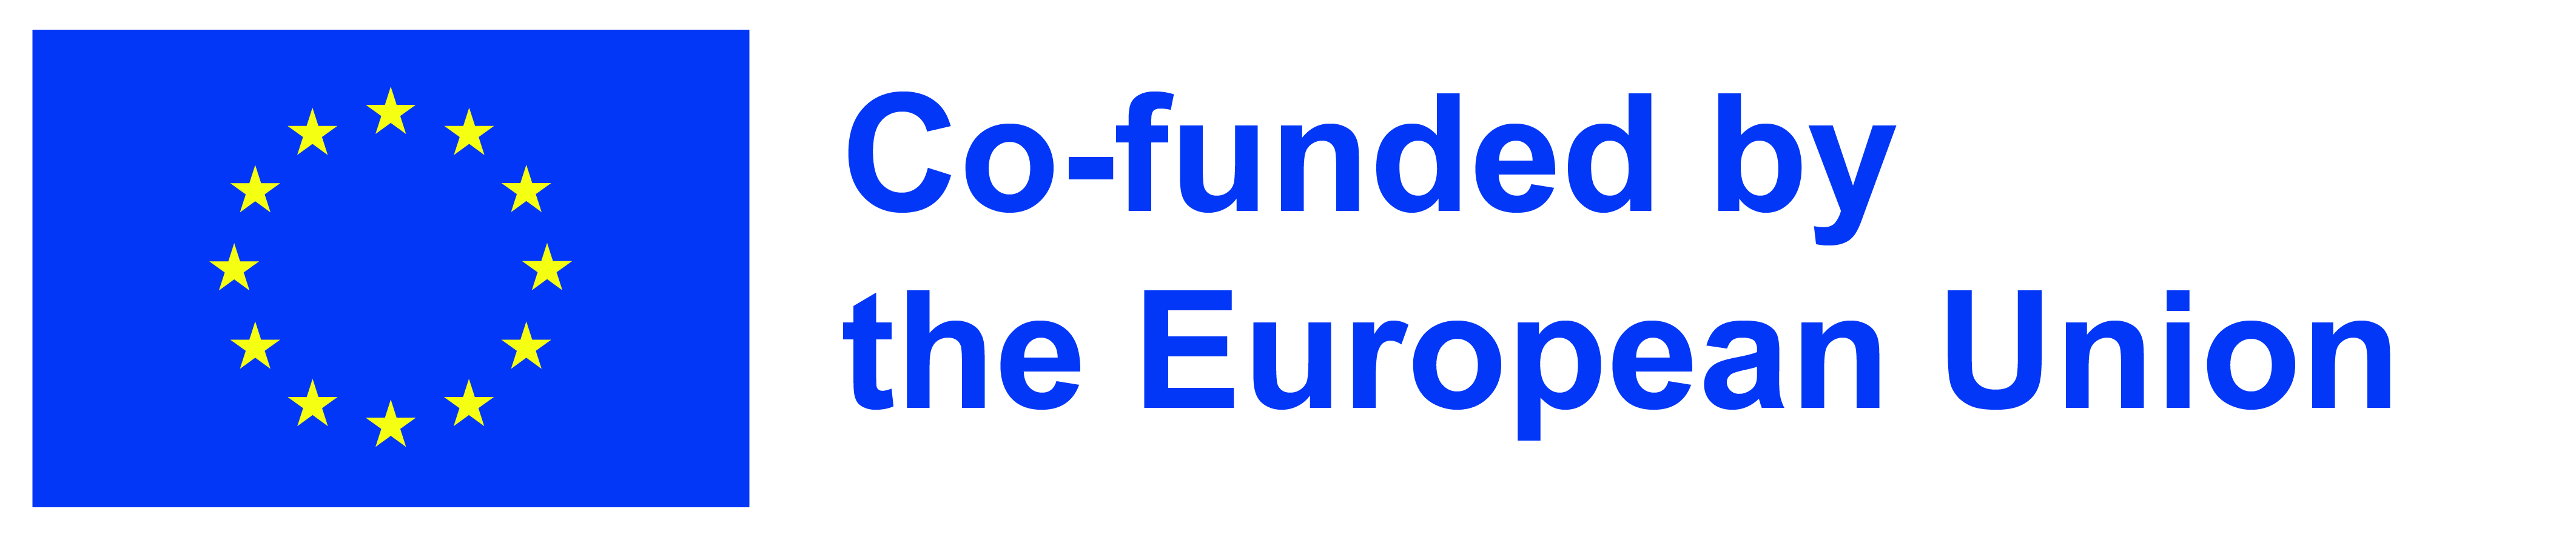 EN Co-funded by the EU_POS 1